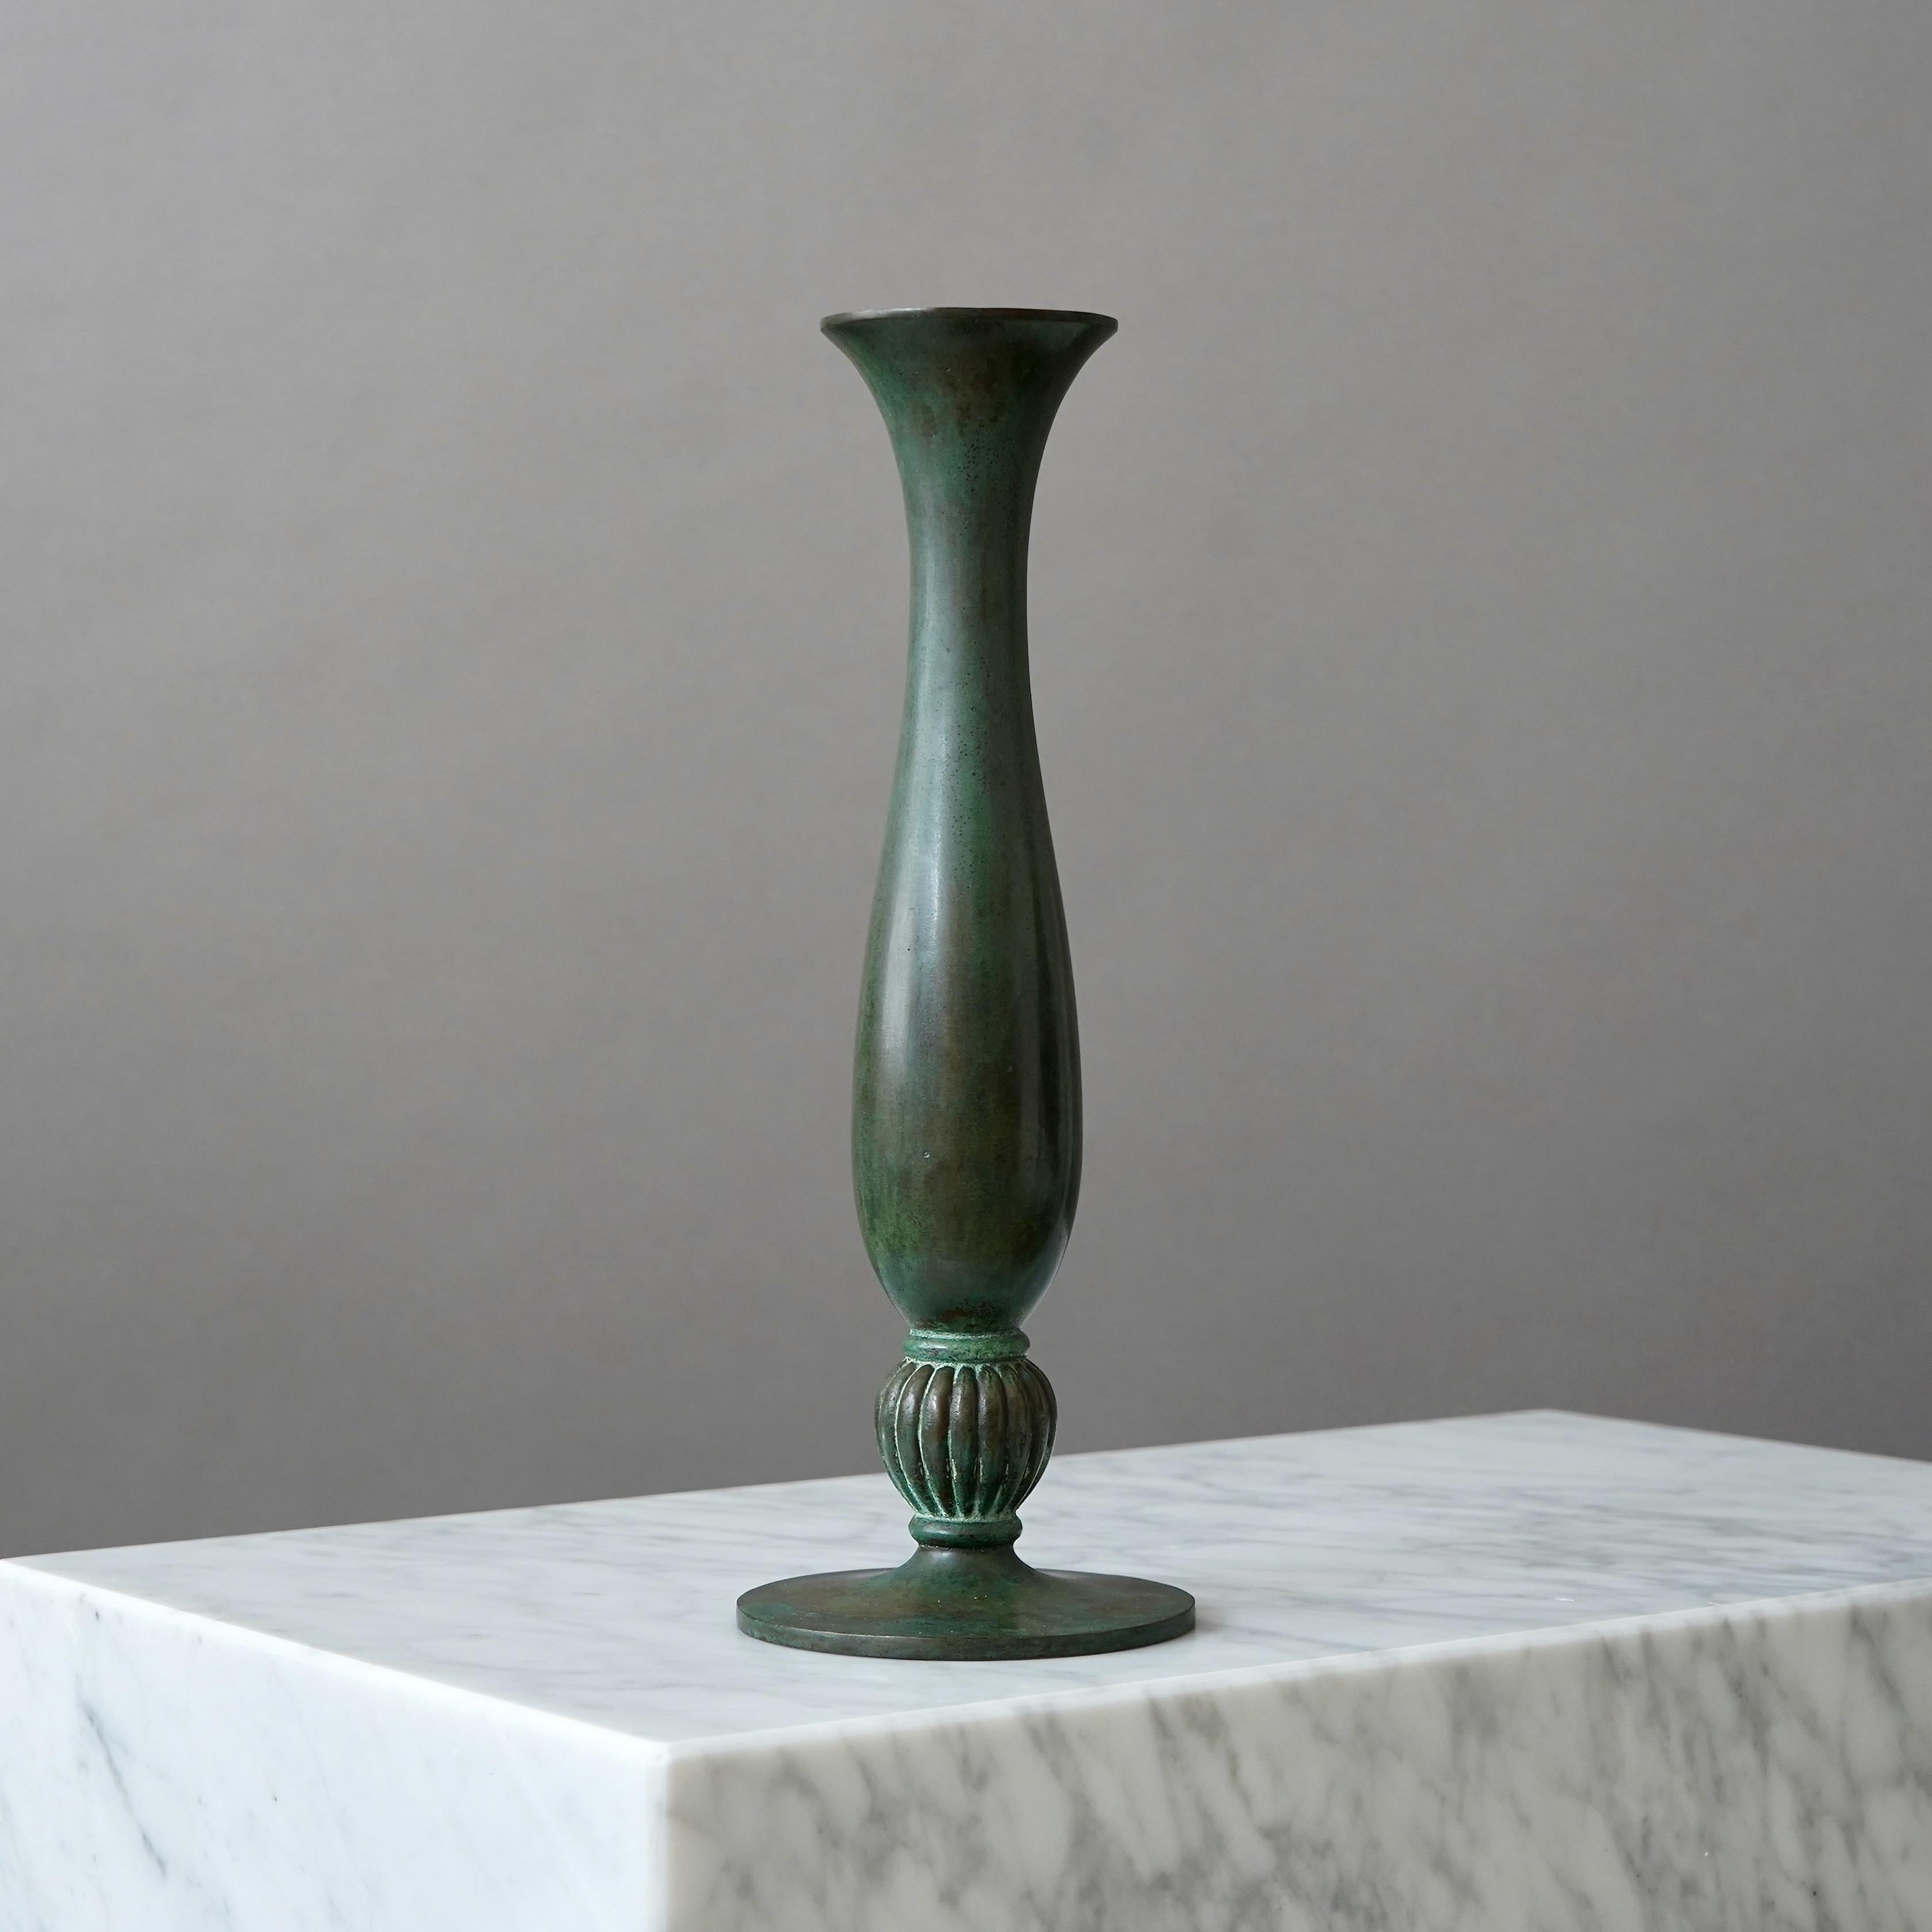 A beautiful bronze vase with amazing patina. Designed by Sune Bäckström in Malmoe, Sweden, 1920s.  

Great condition.
Stamped 'BRONS', model number '9044' and signature 'Sune Bäckström'.

Produced by Einar Bäckström Metallvarufabrik in Malmö,